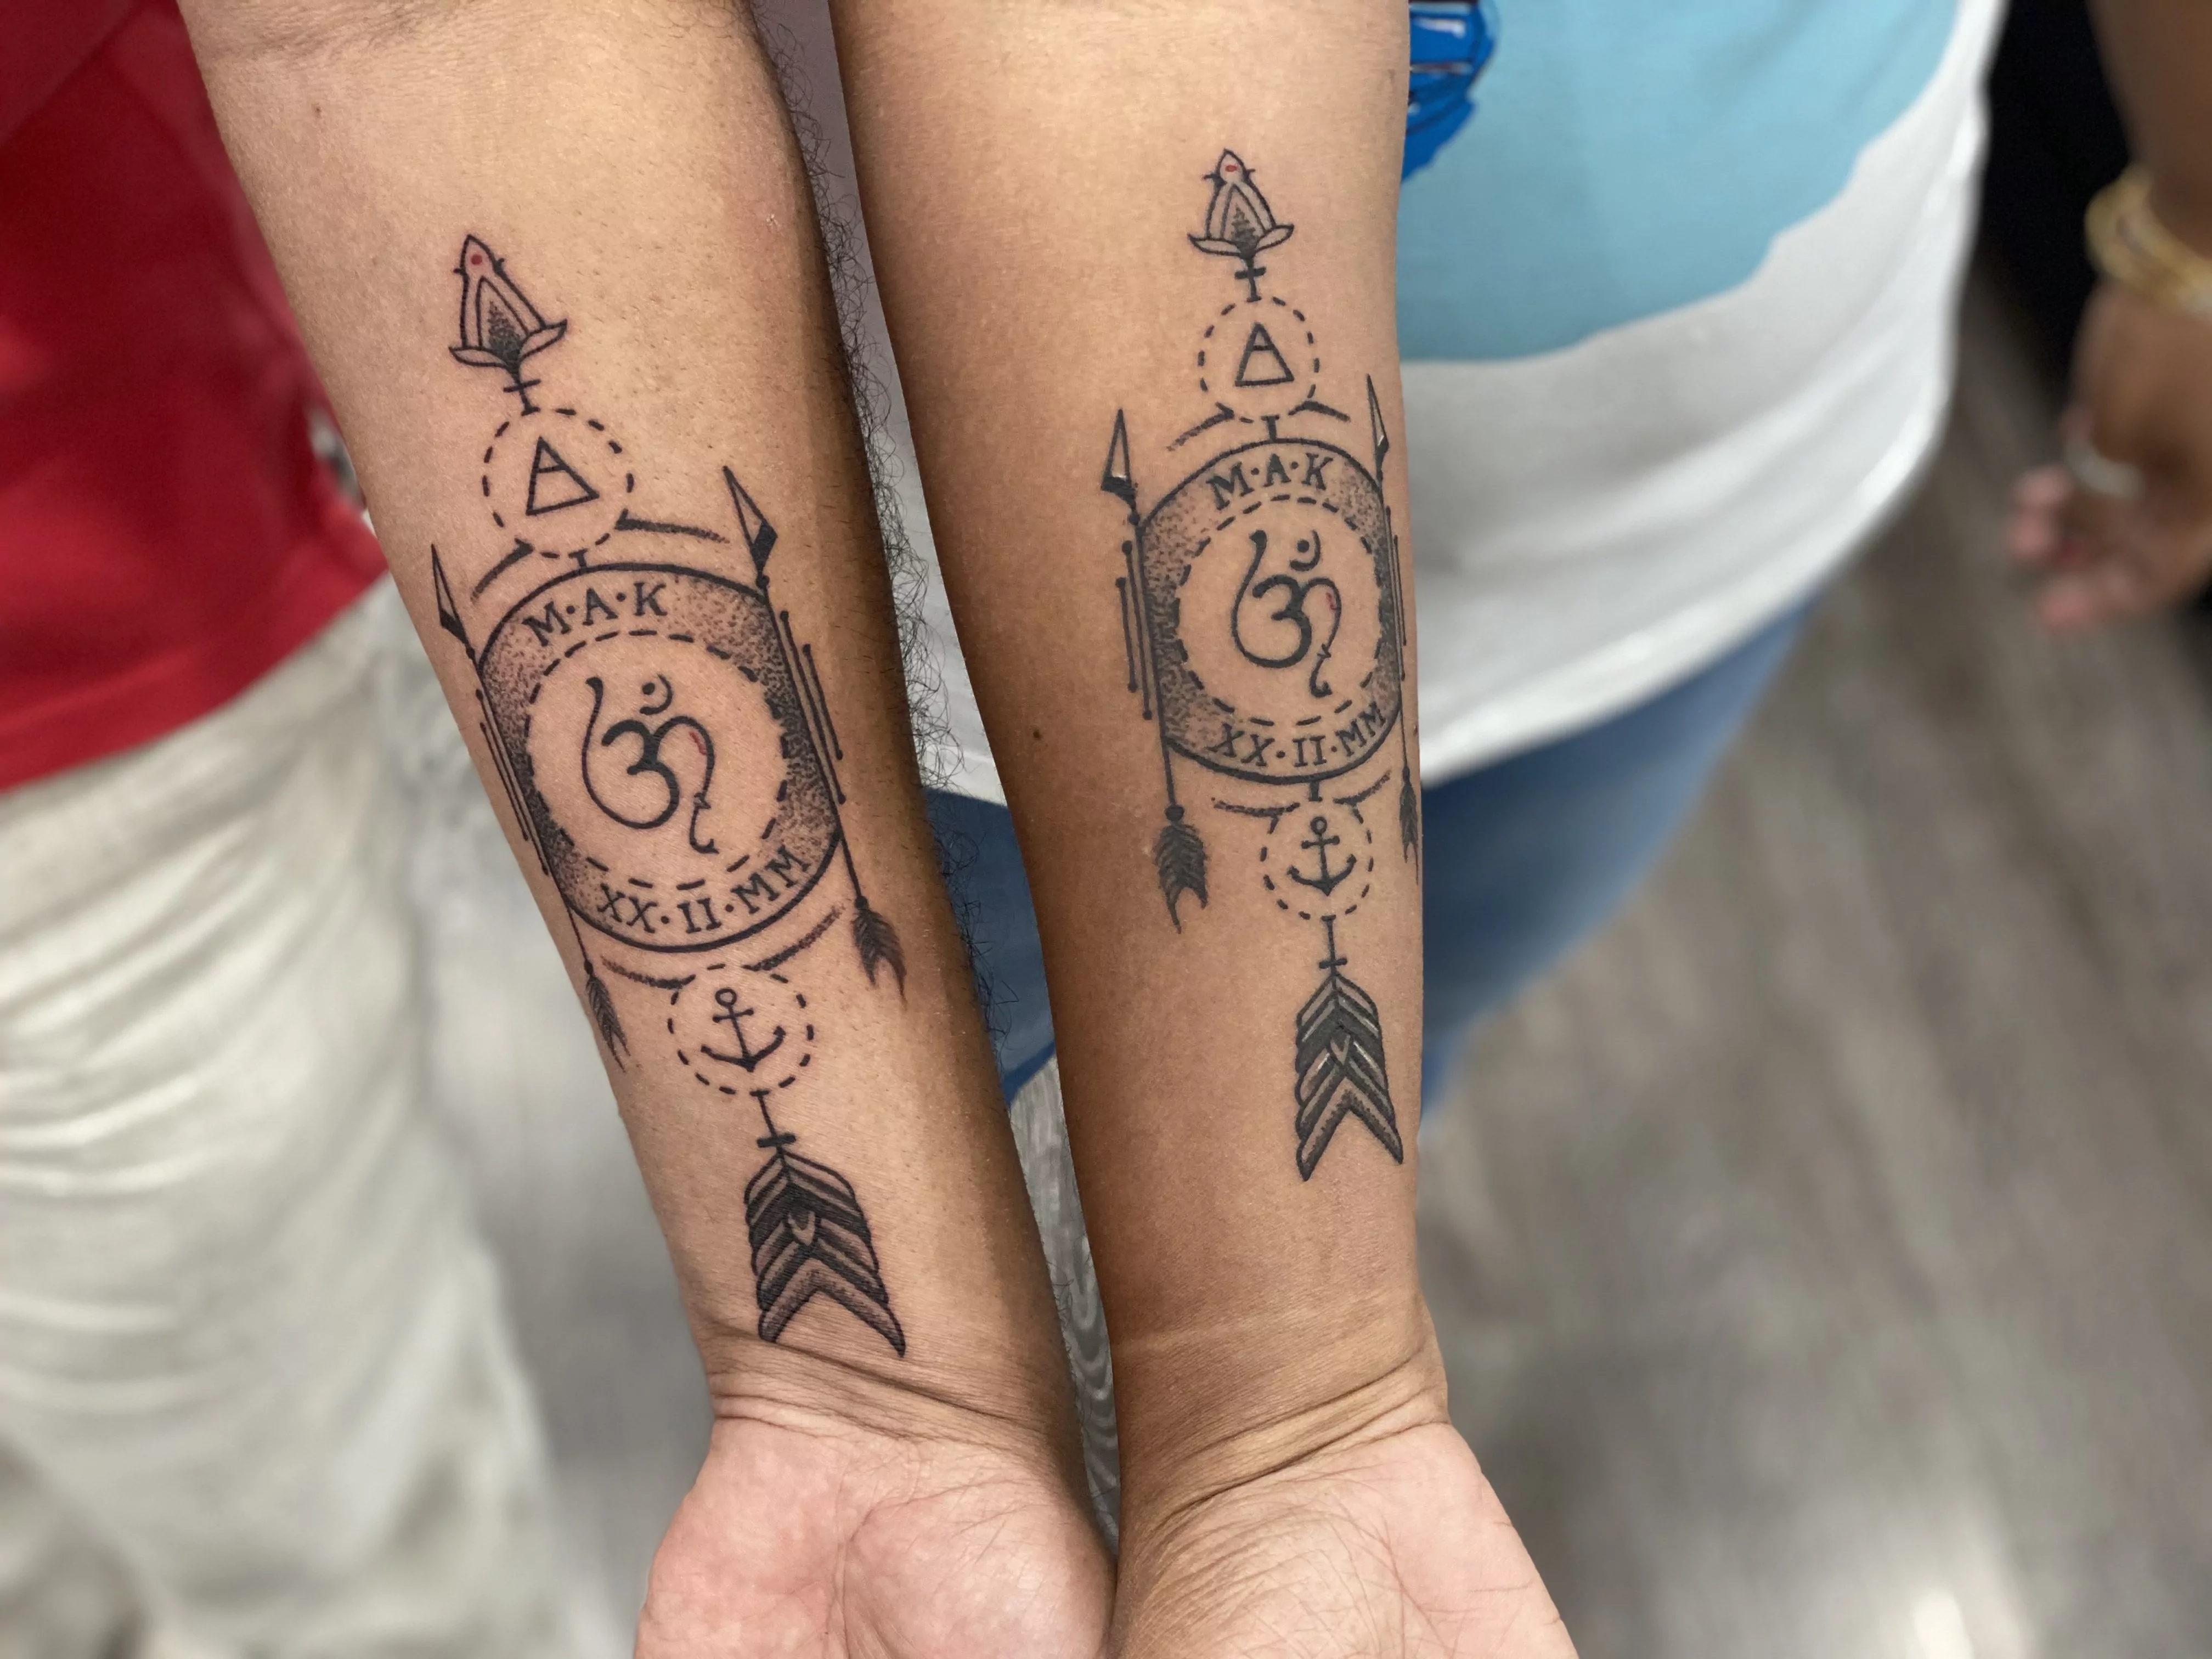 Check out our website for more Tattoo Ideas  positivefoxcom  forearmtattoos tattooideas co  Couples tattoo designs Matching couple  tattoos Matching tattoos